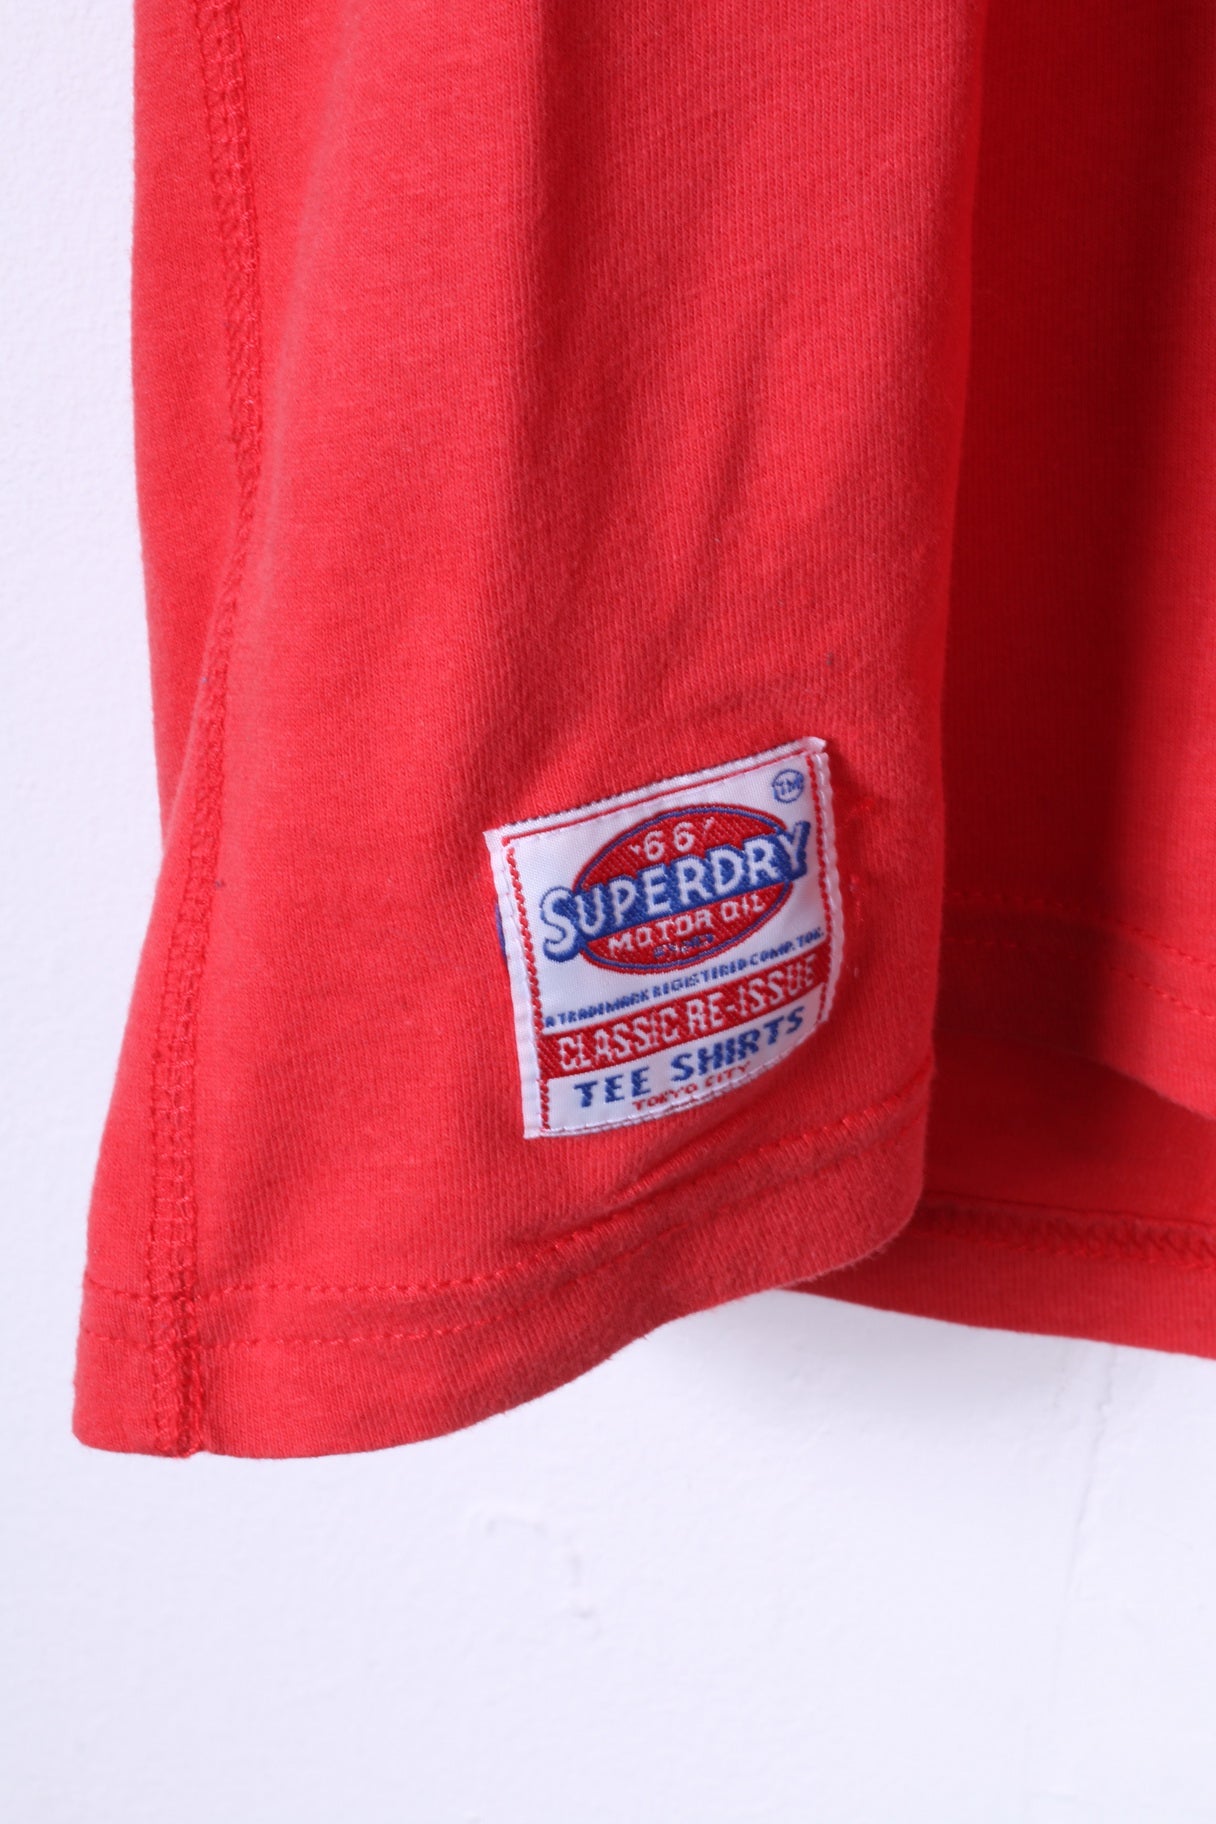 Superdry Mens L T-Shirt Red Cotton Motor Oil Graphic Gasoline Slim Fit Top